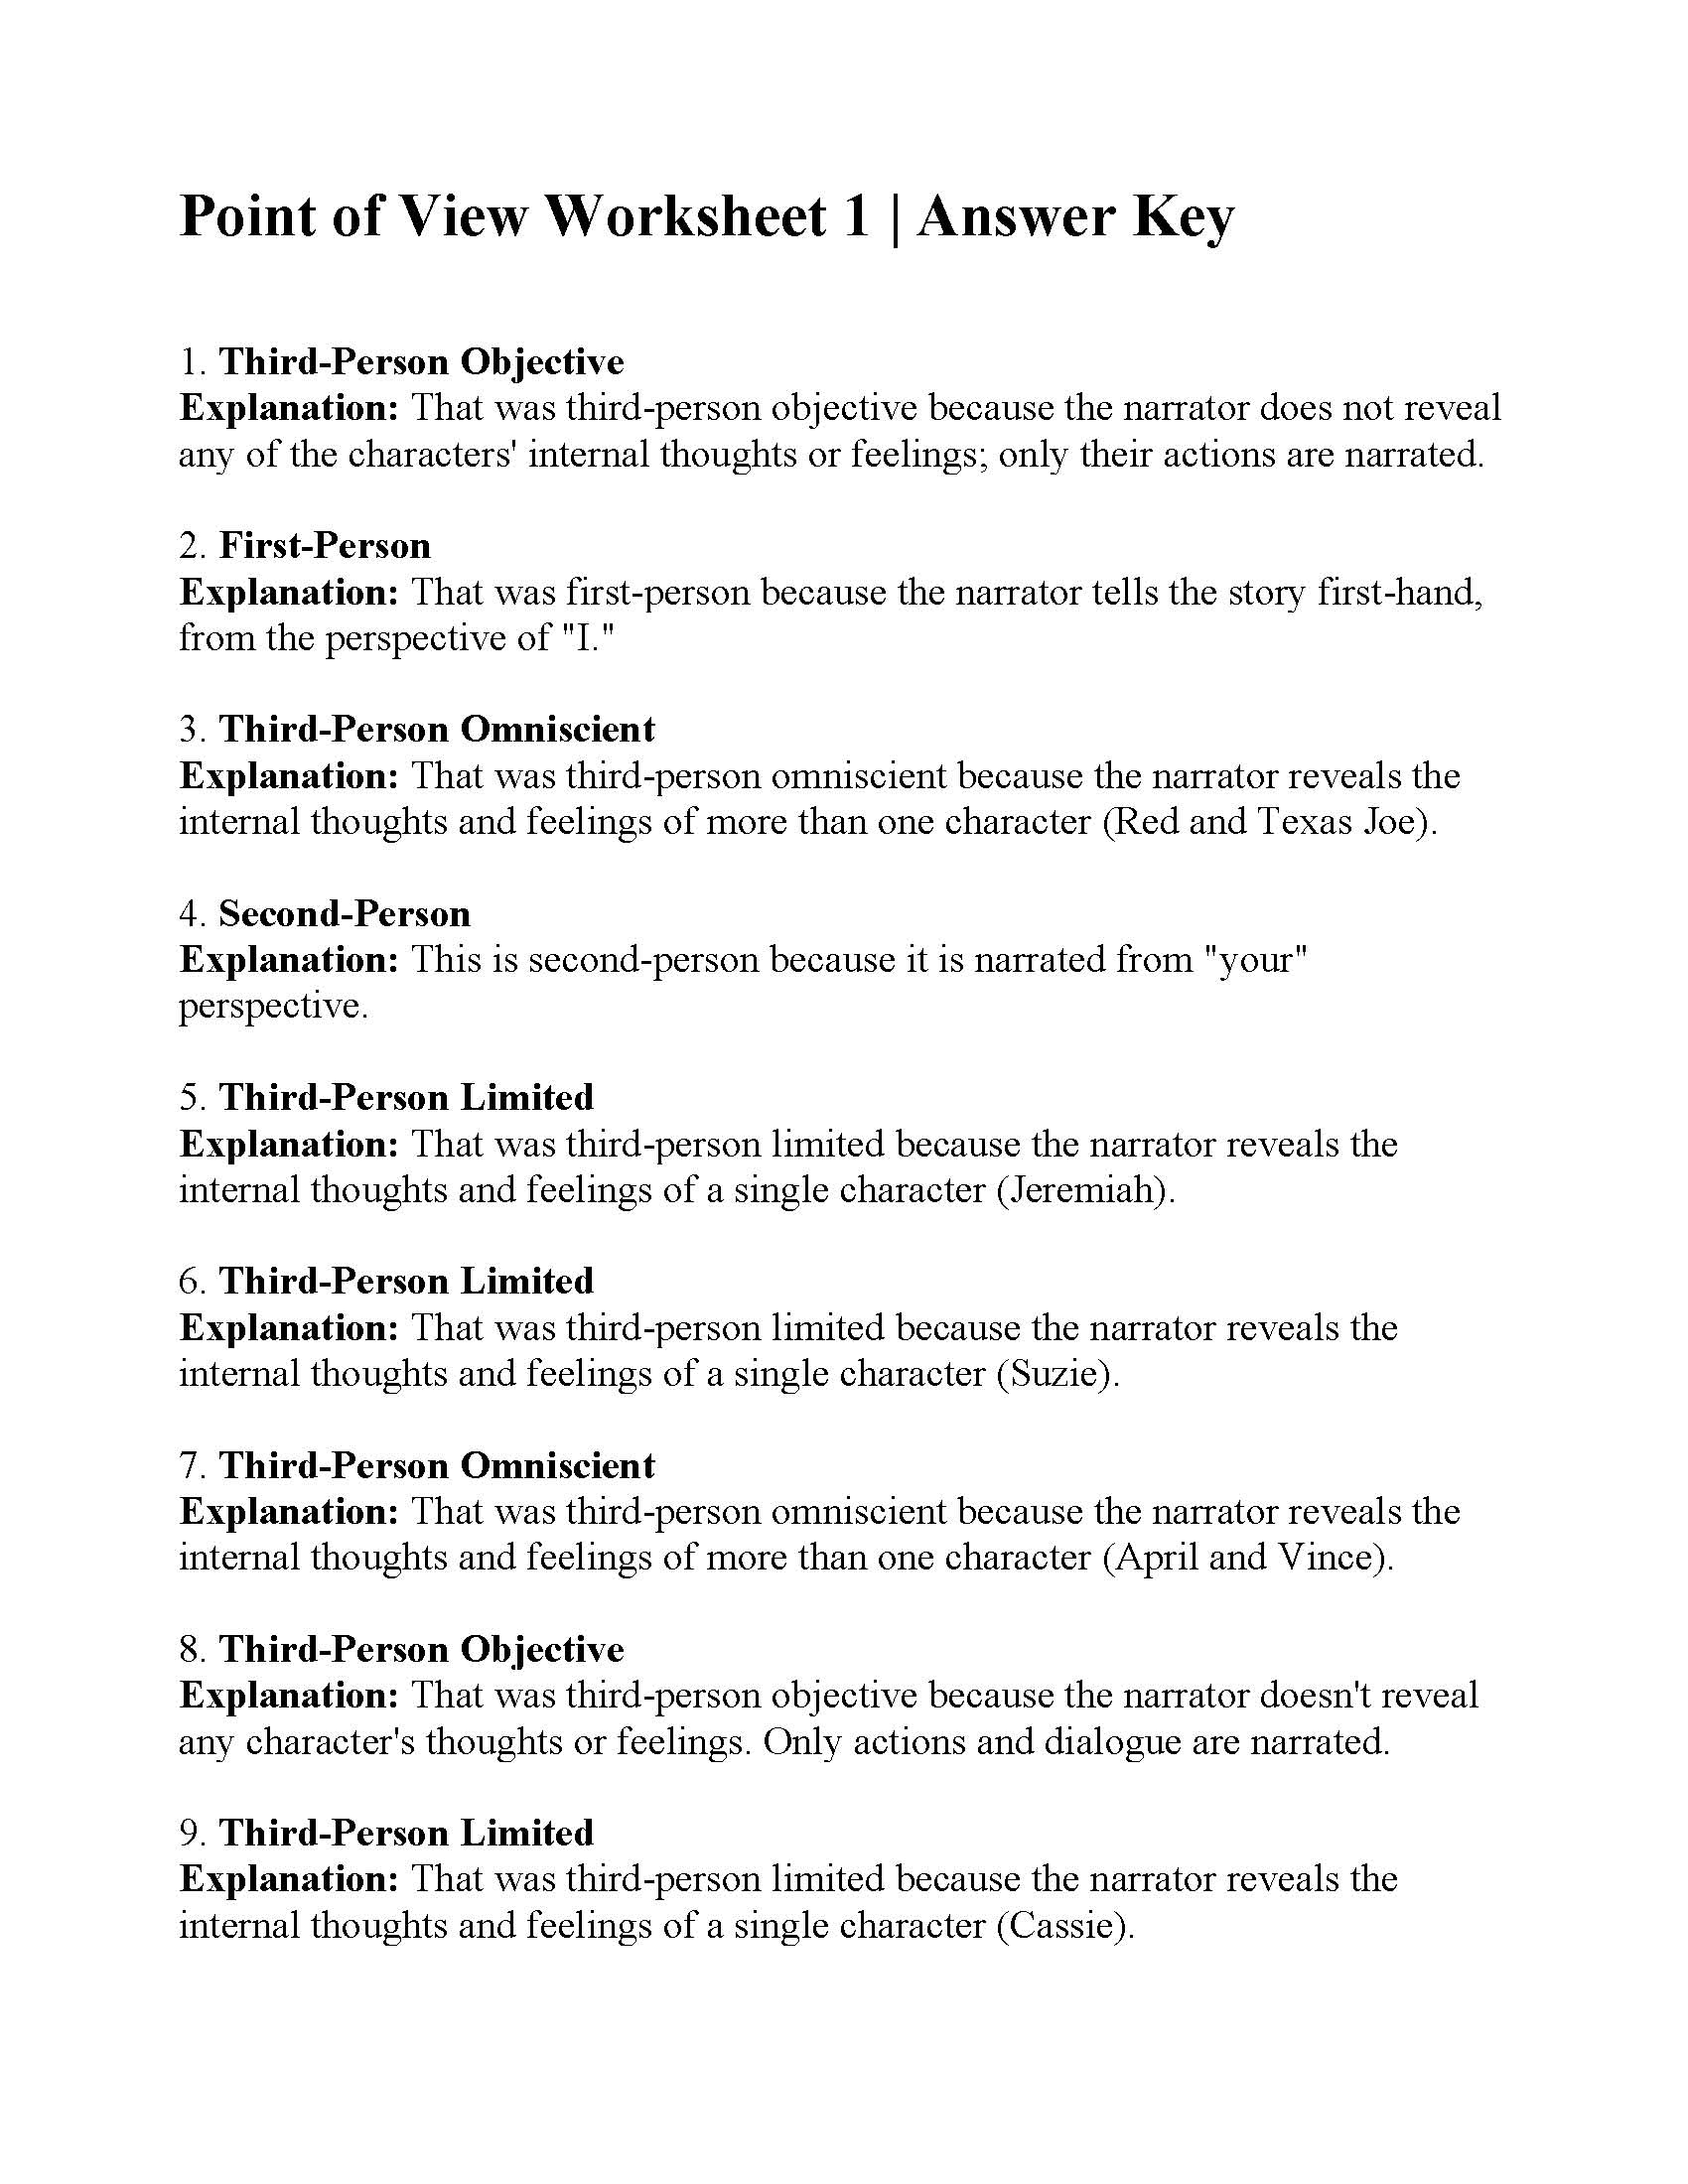 Point of View Worksheet 20  Answers Throughout Point Of View Worksheet 11